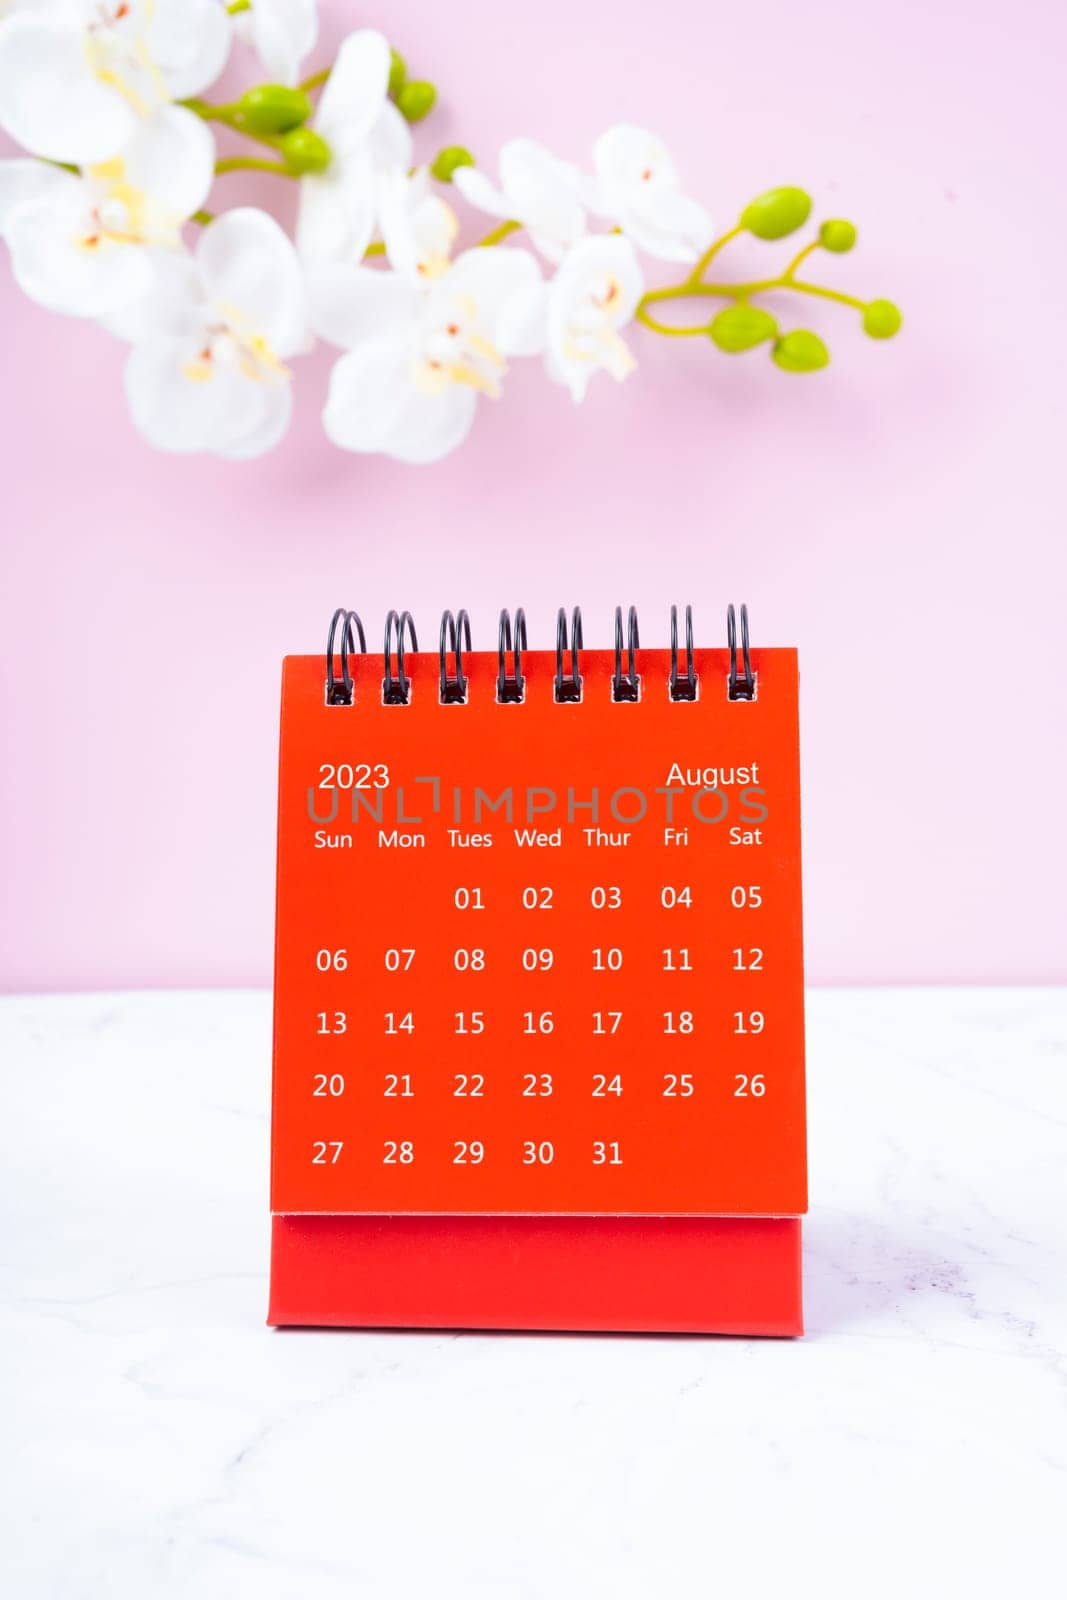 The Red calendar August 2023. Desk calendar for year 2023 and pink orchid on pink background. by Gamjai